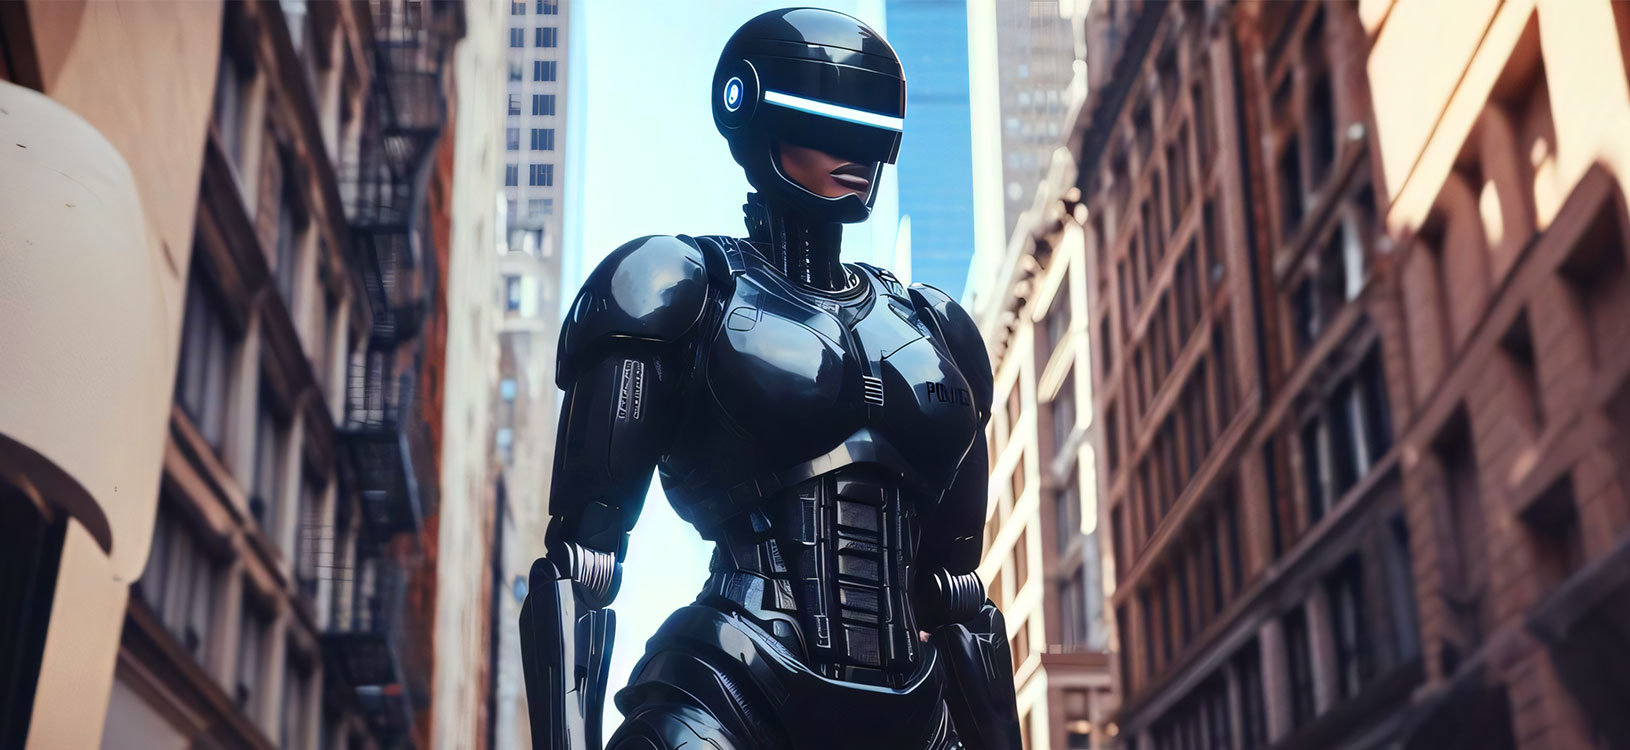 Robots in the police service. RoboCop - reality or fiction?